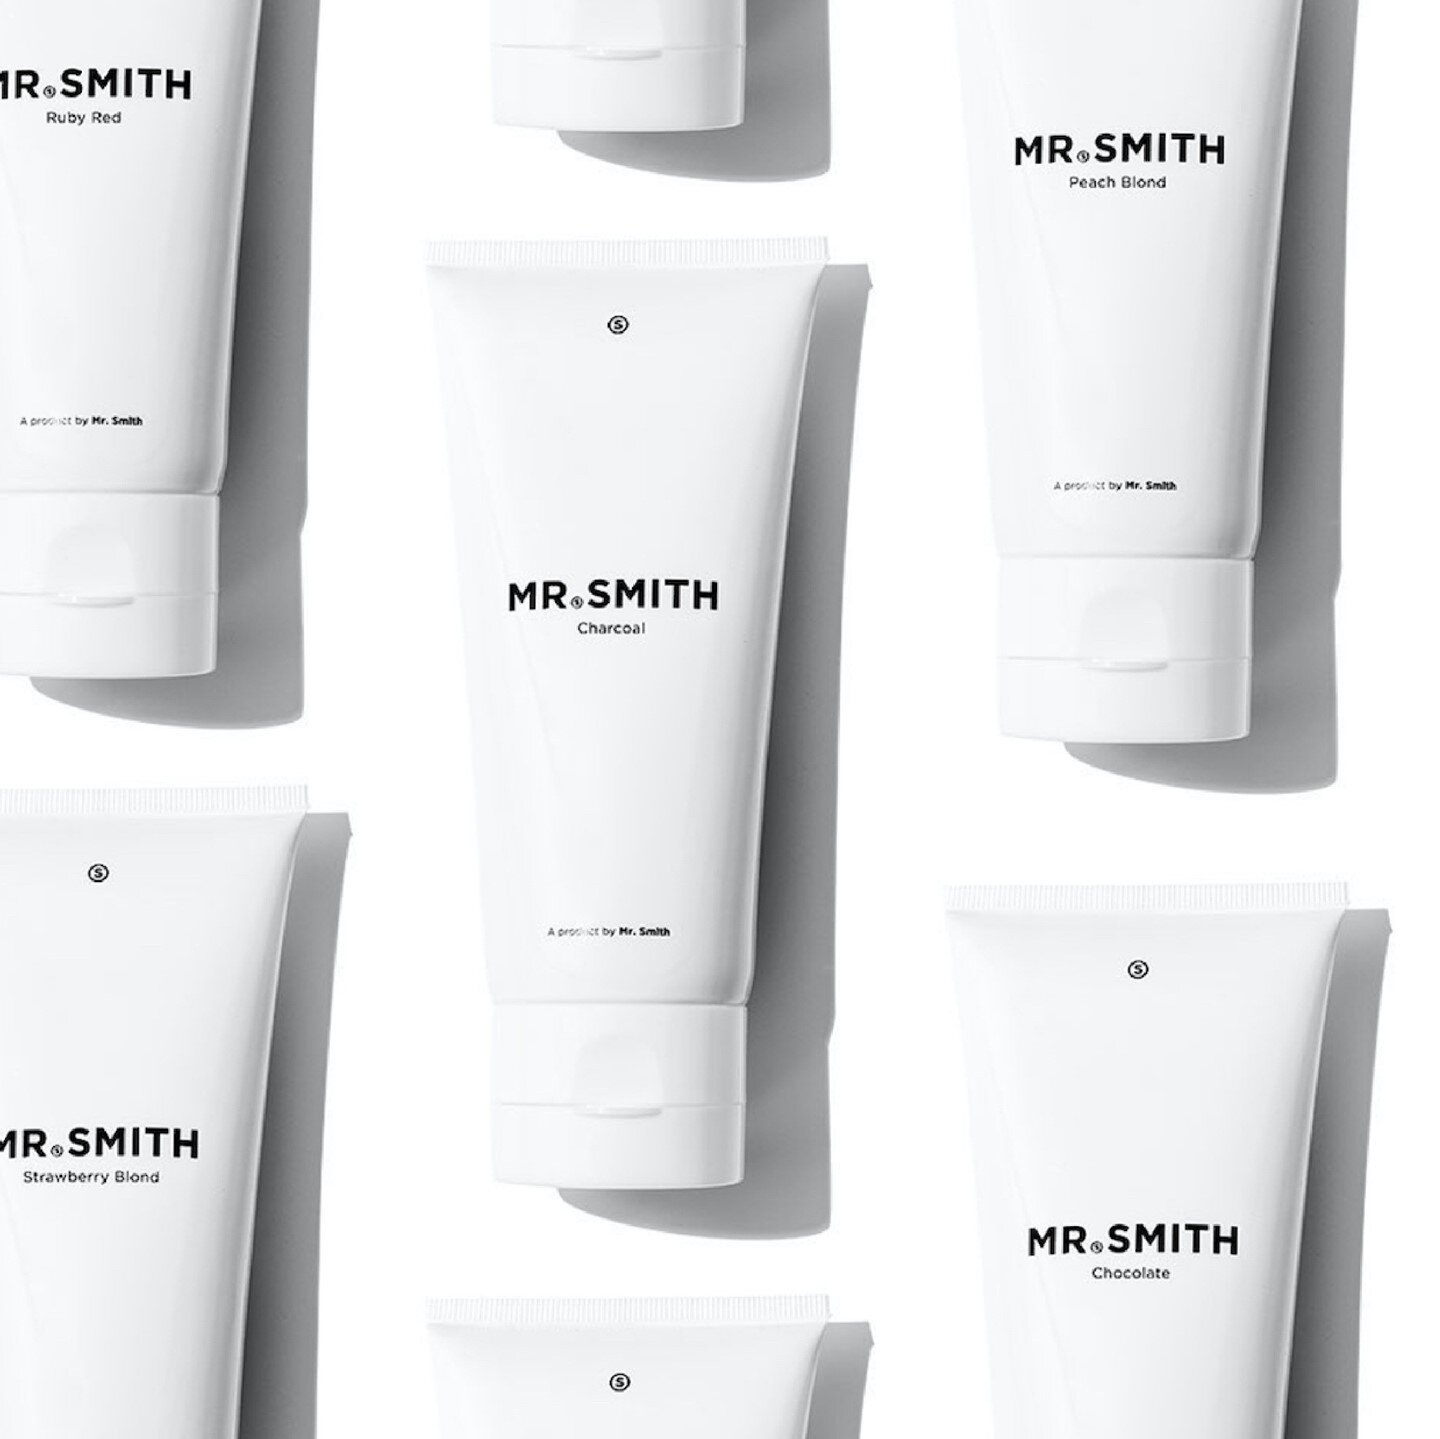 Choose from a range of @mrsmithhair pigments! 
And have a little fun with your hair while in lockdown! 
There are 6 fun colours to choose from:
+ Strawberry blonde 
+ Coral peach
+ Chocolate 
+ Charcoal
+ Ruby red 
+ Blond 
 

DM us if you'd like to 